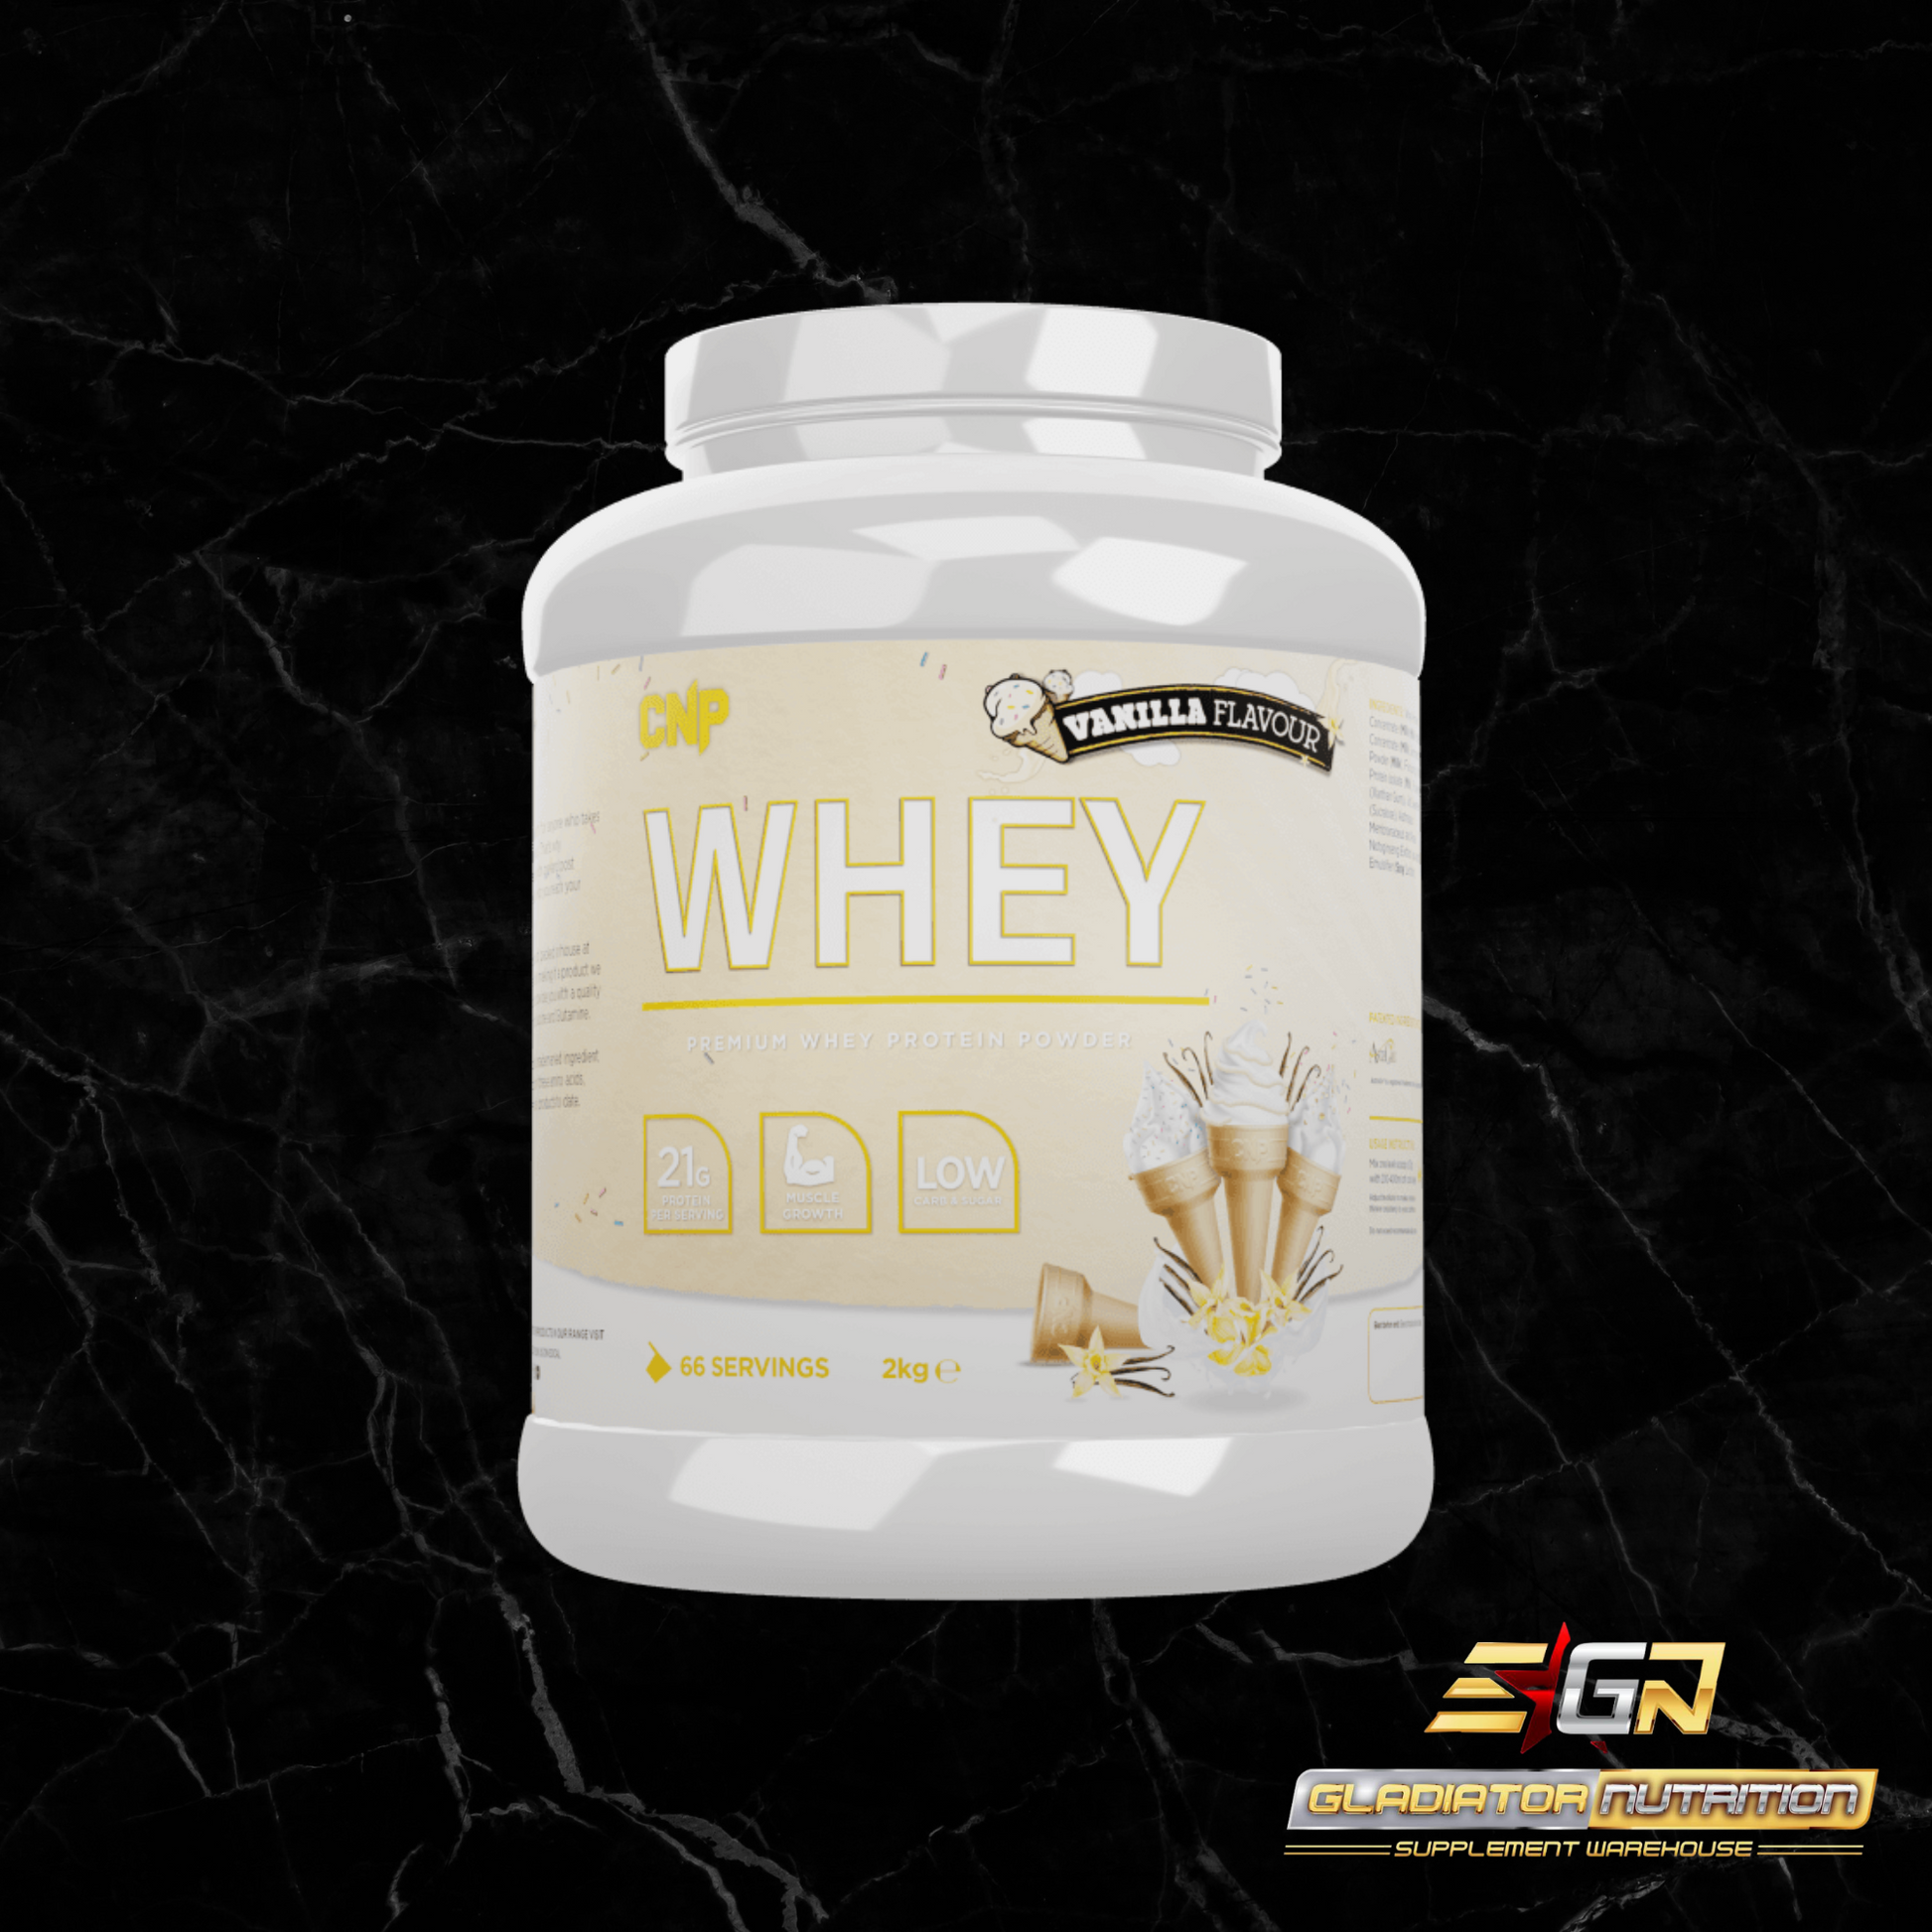 Whey Protein | CNP Whey